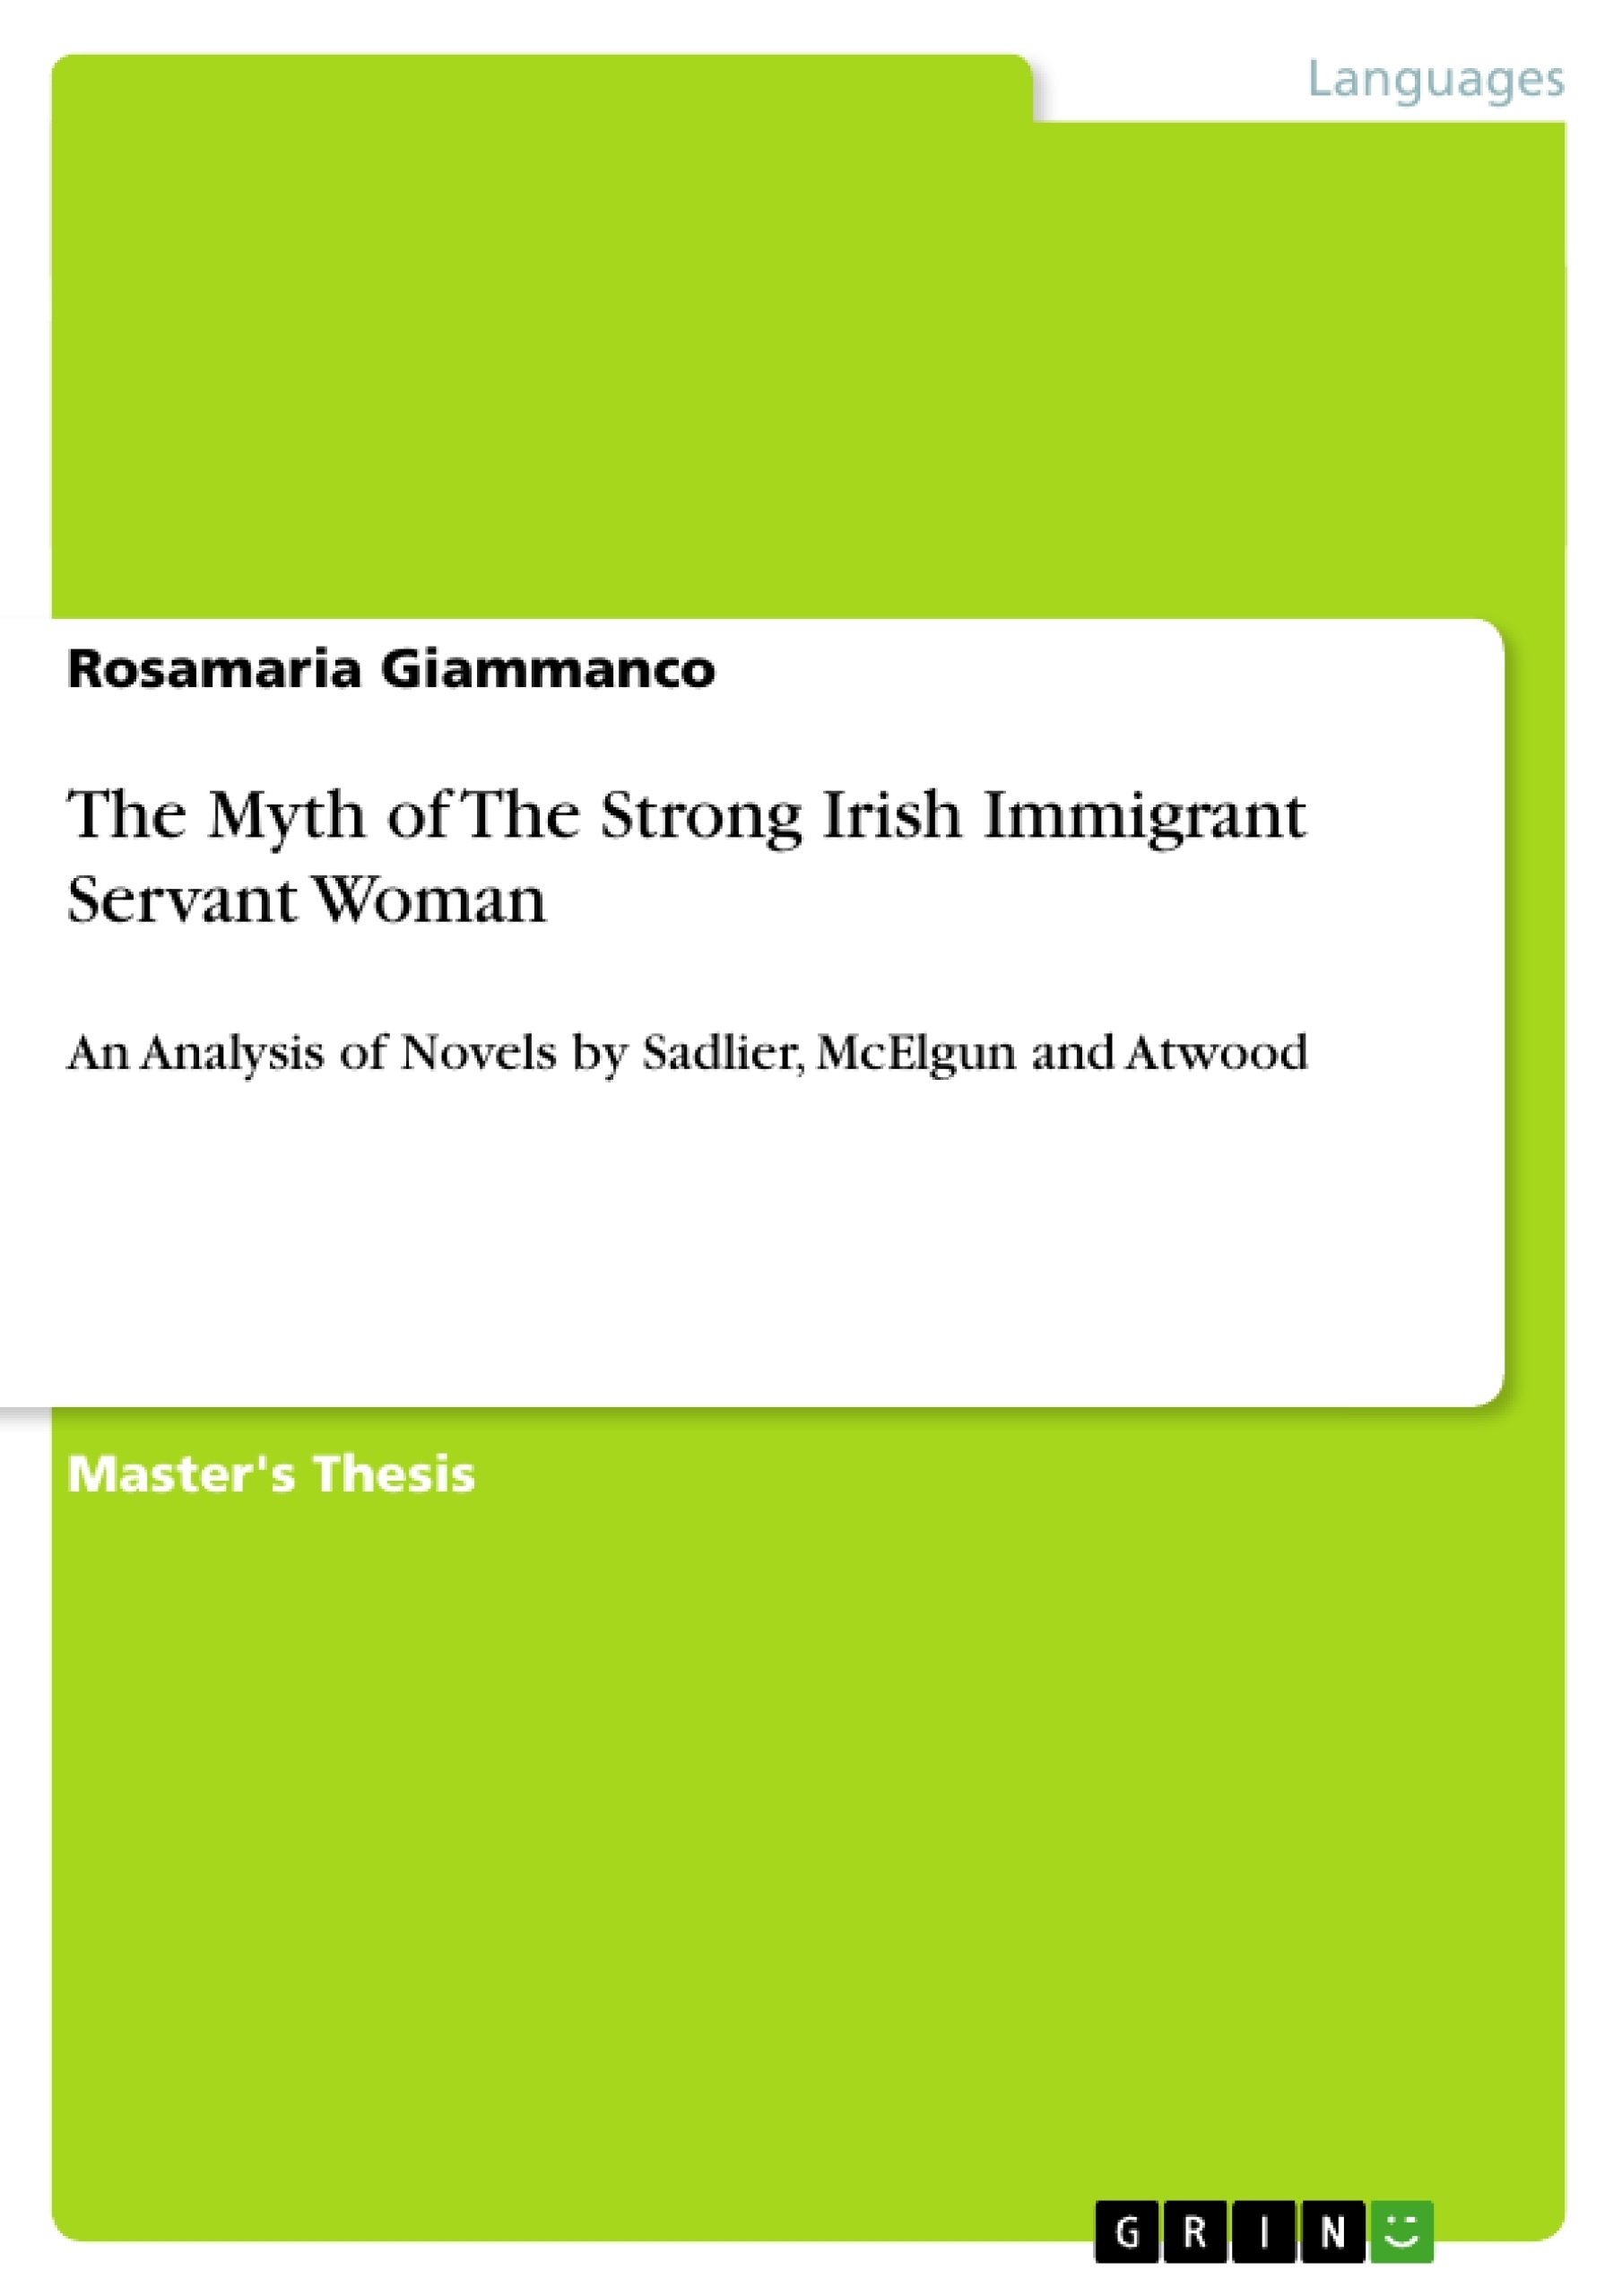 Titre: The Myth of The Strong Irish Immigrant Servant Woman